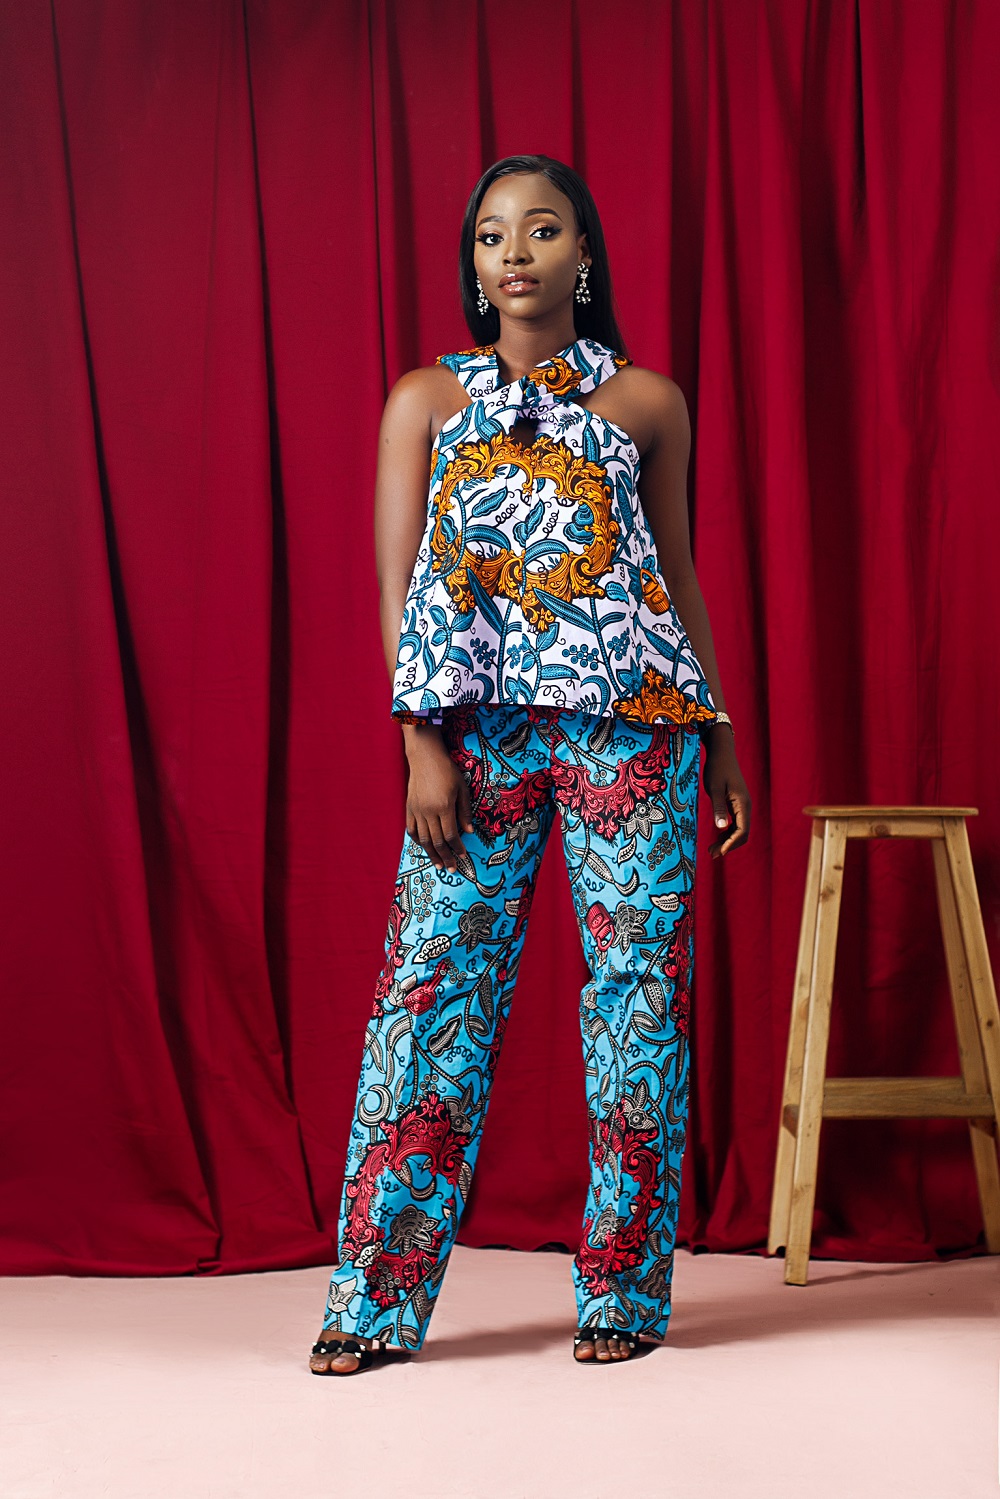 Afraid Of Prints? Erilyn’s Spring/Summer 2018 Collection Will Change Your Mind